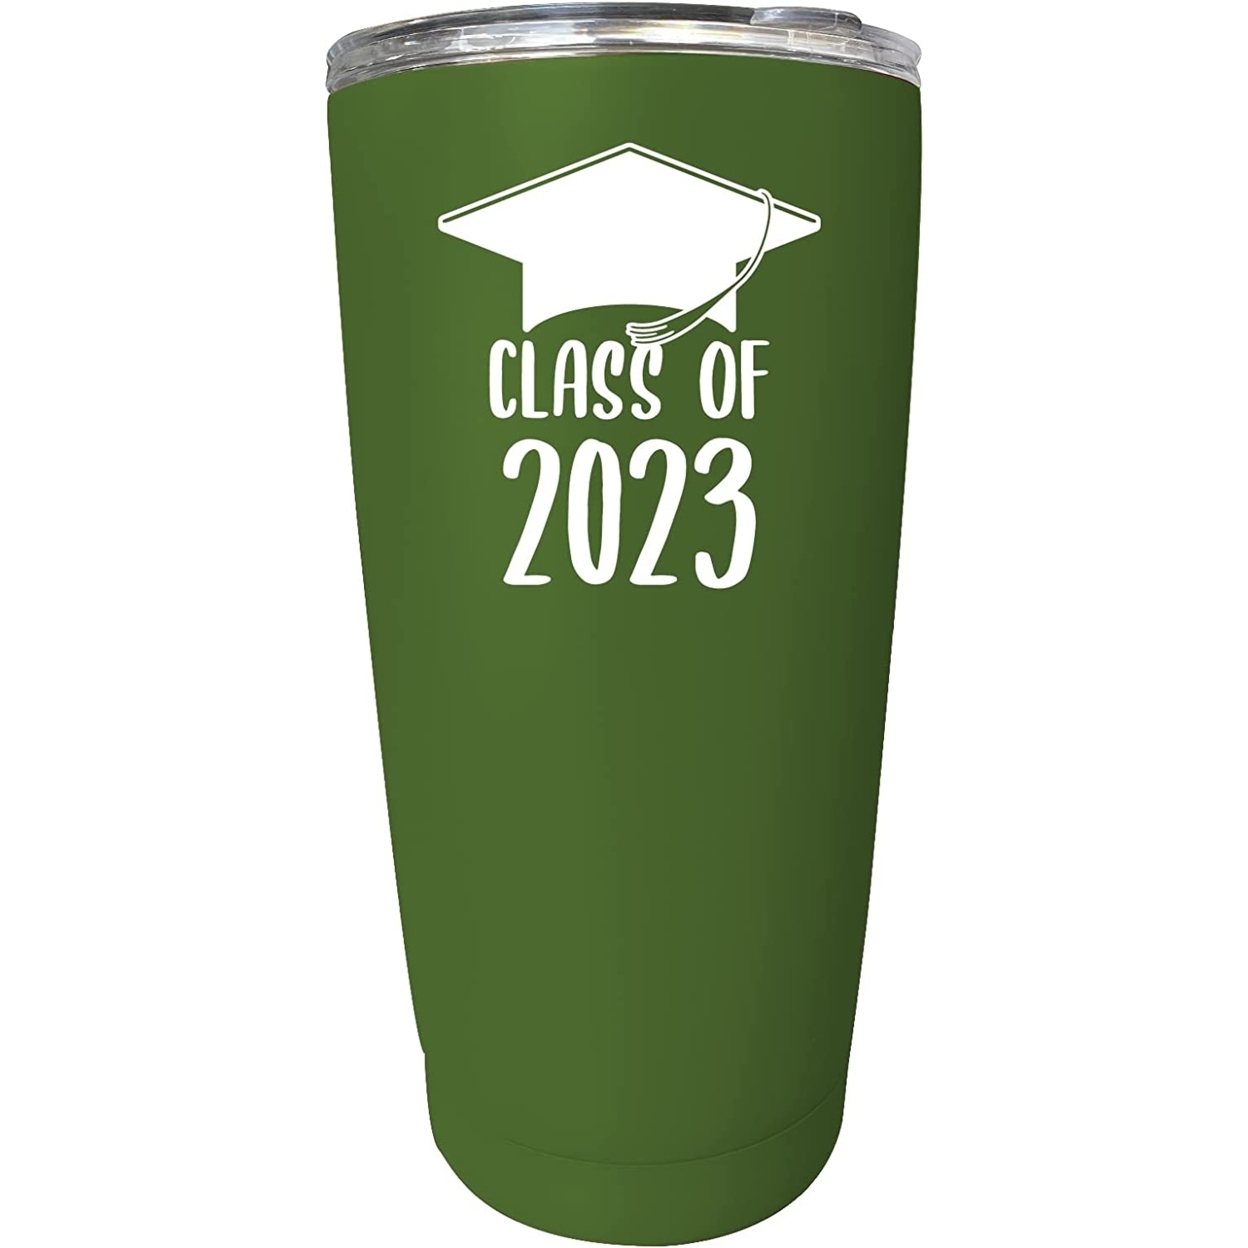 R And R Imports Class Of 2023 Graduation Senior Grad 16 Oz Stainless Steel Insulated Tumbler - Navy